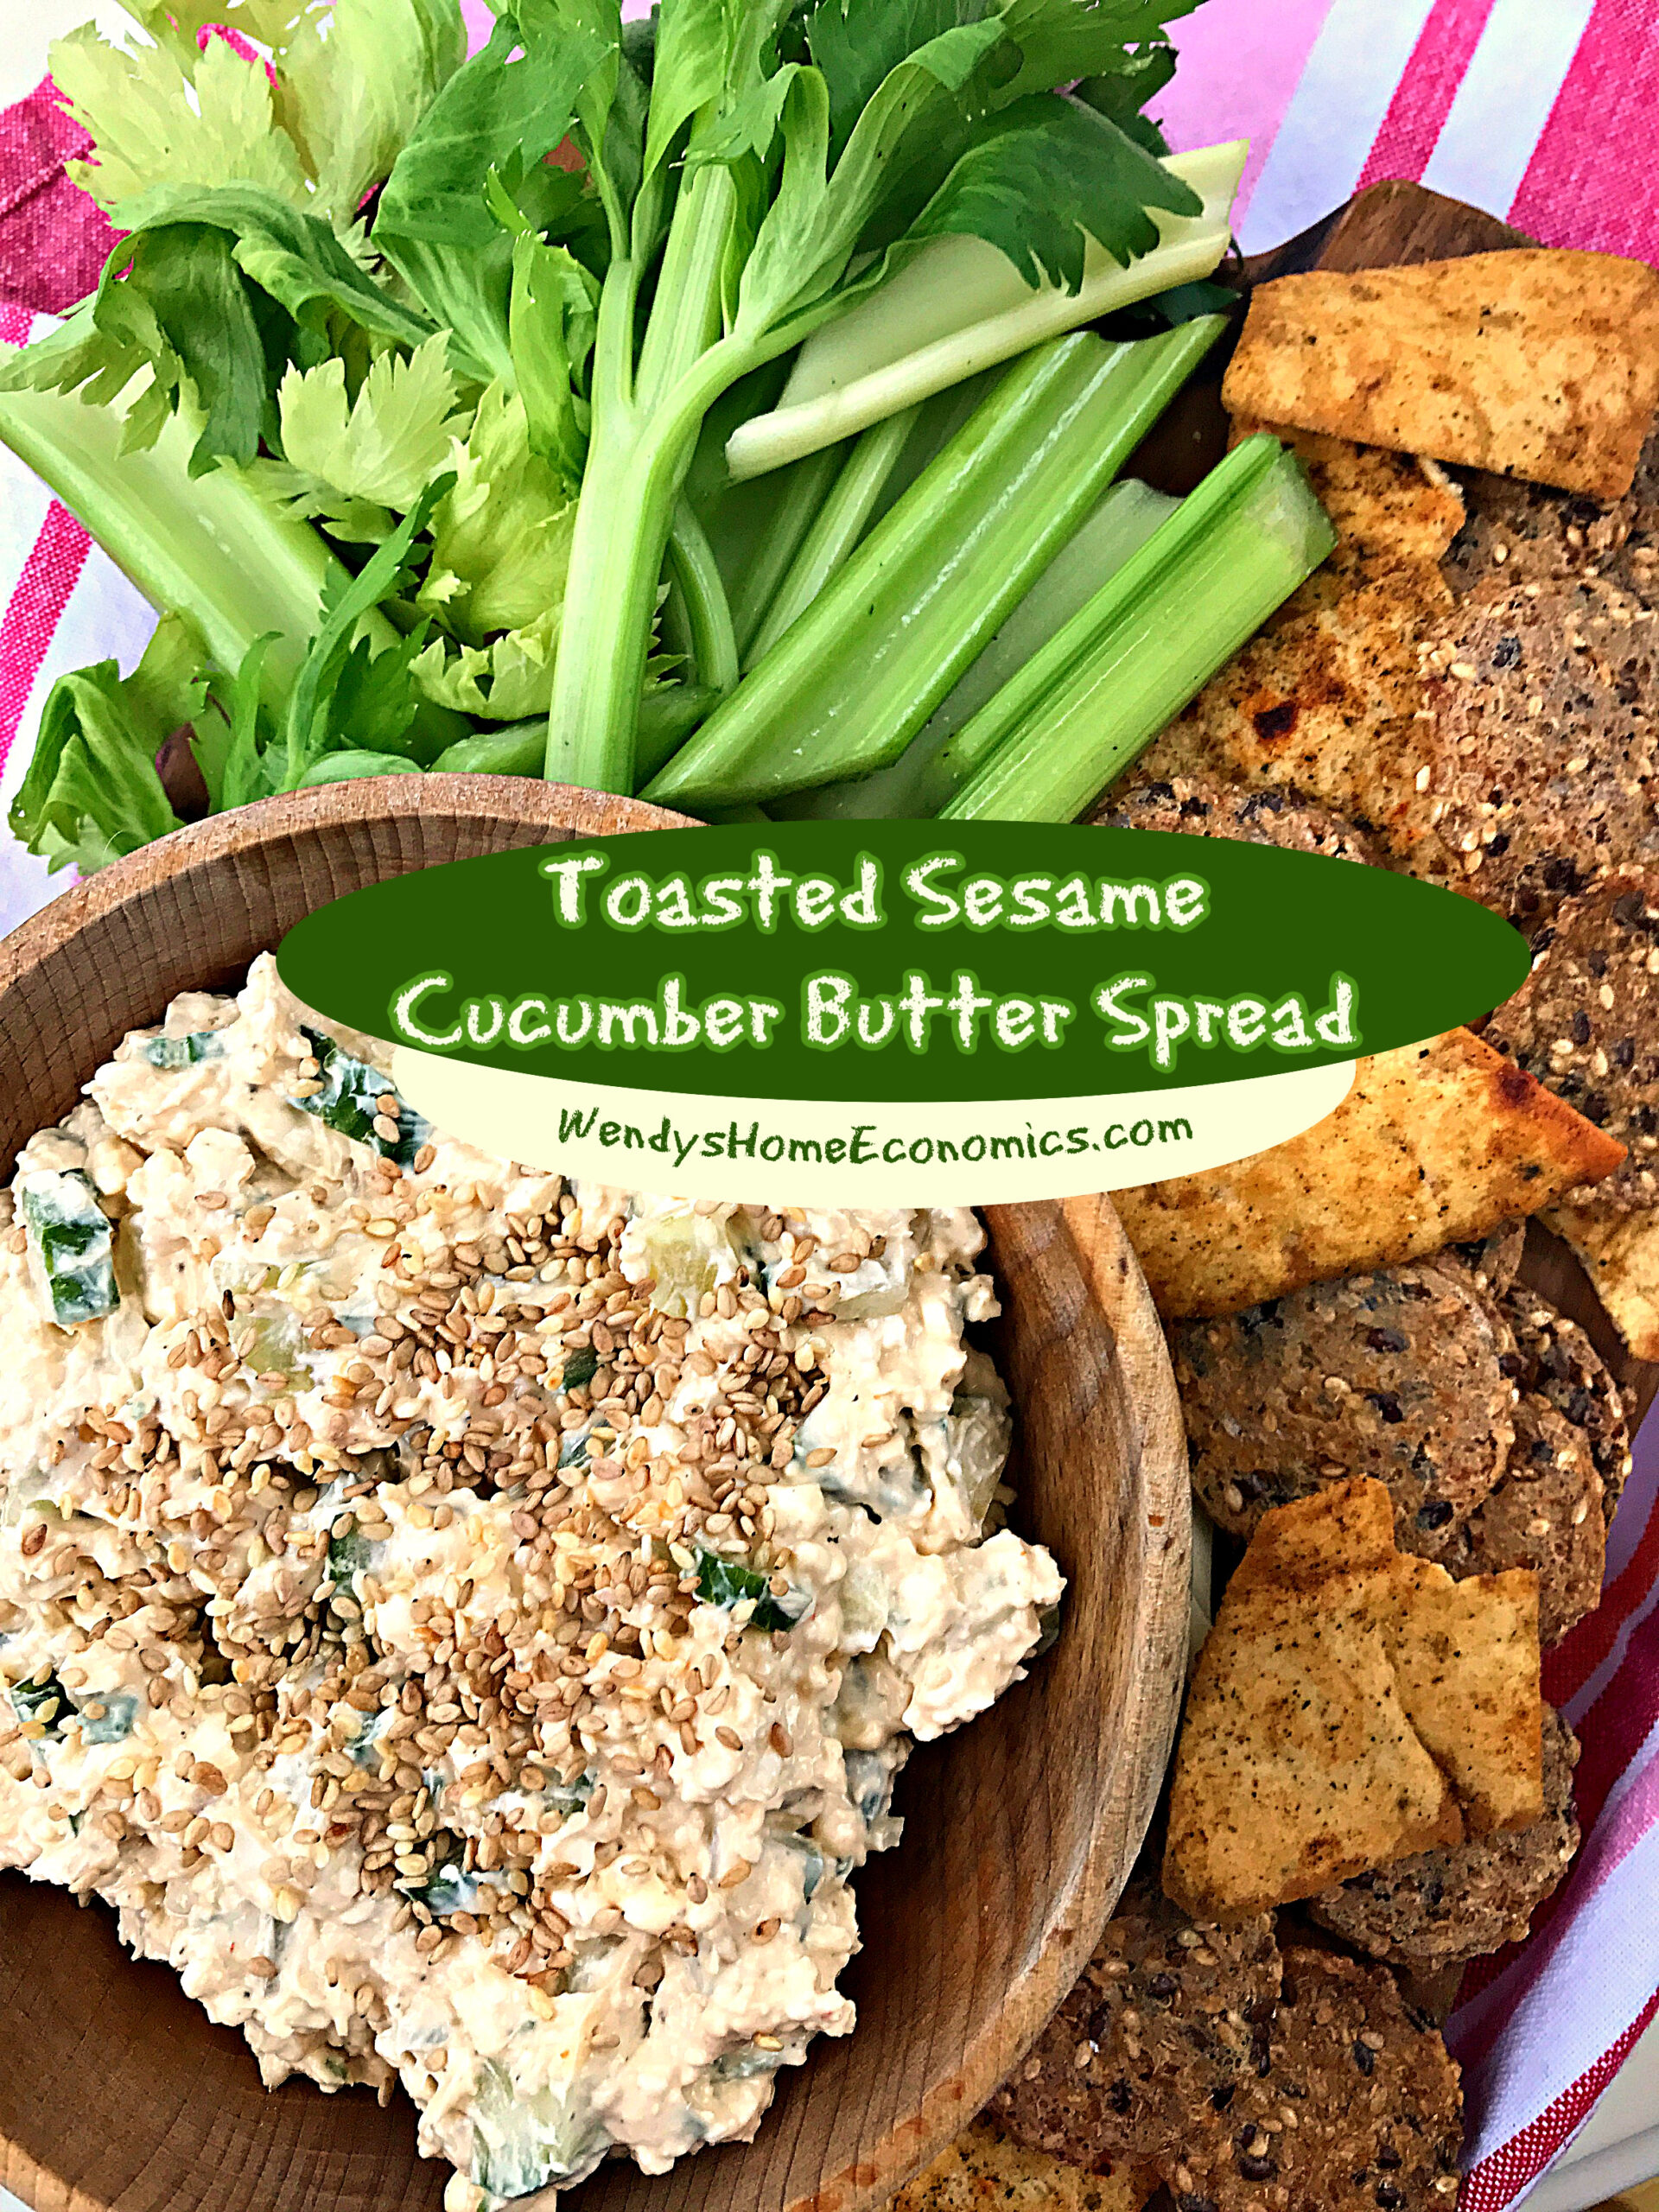 Toasted Sesame Cucumber Butter Spread